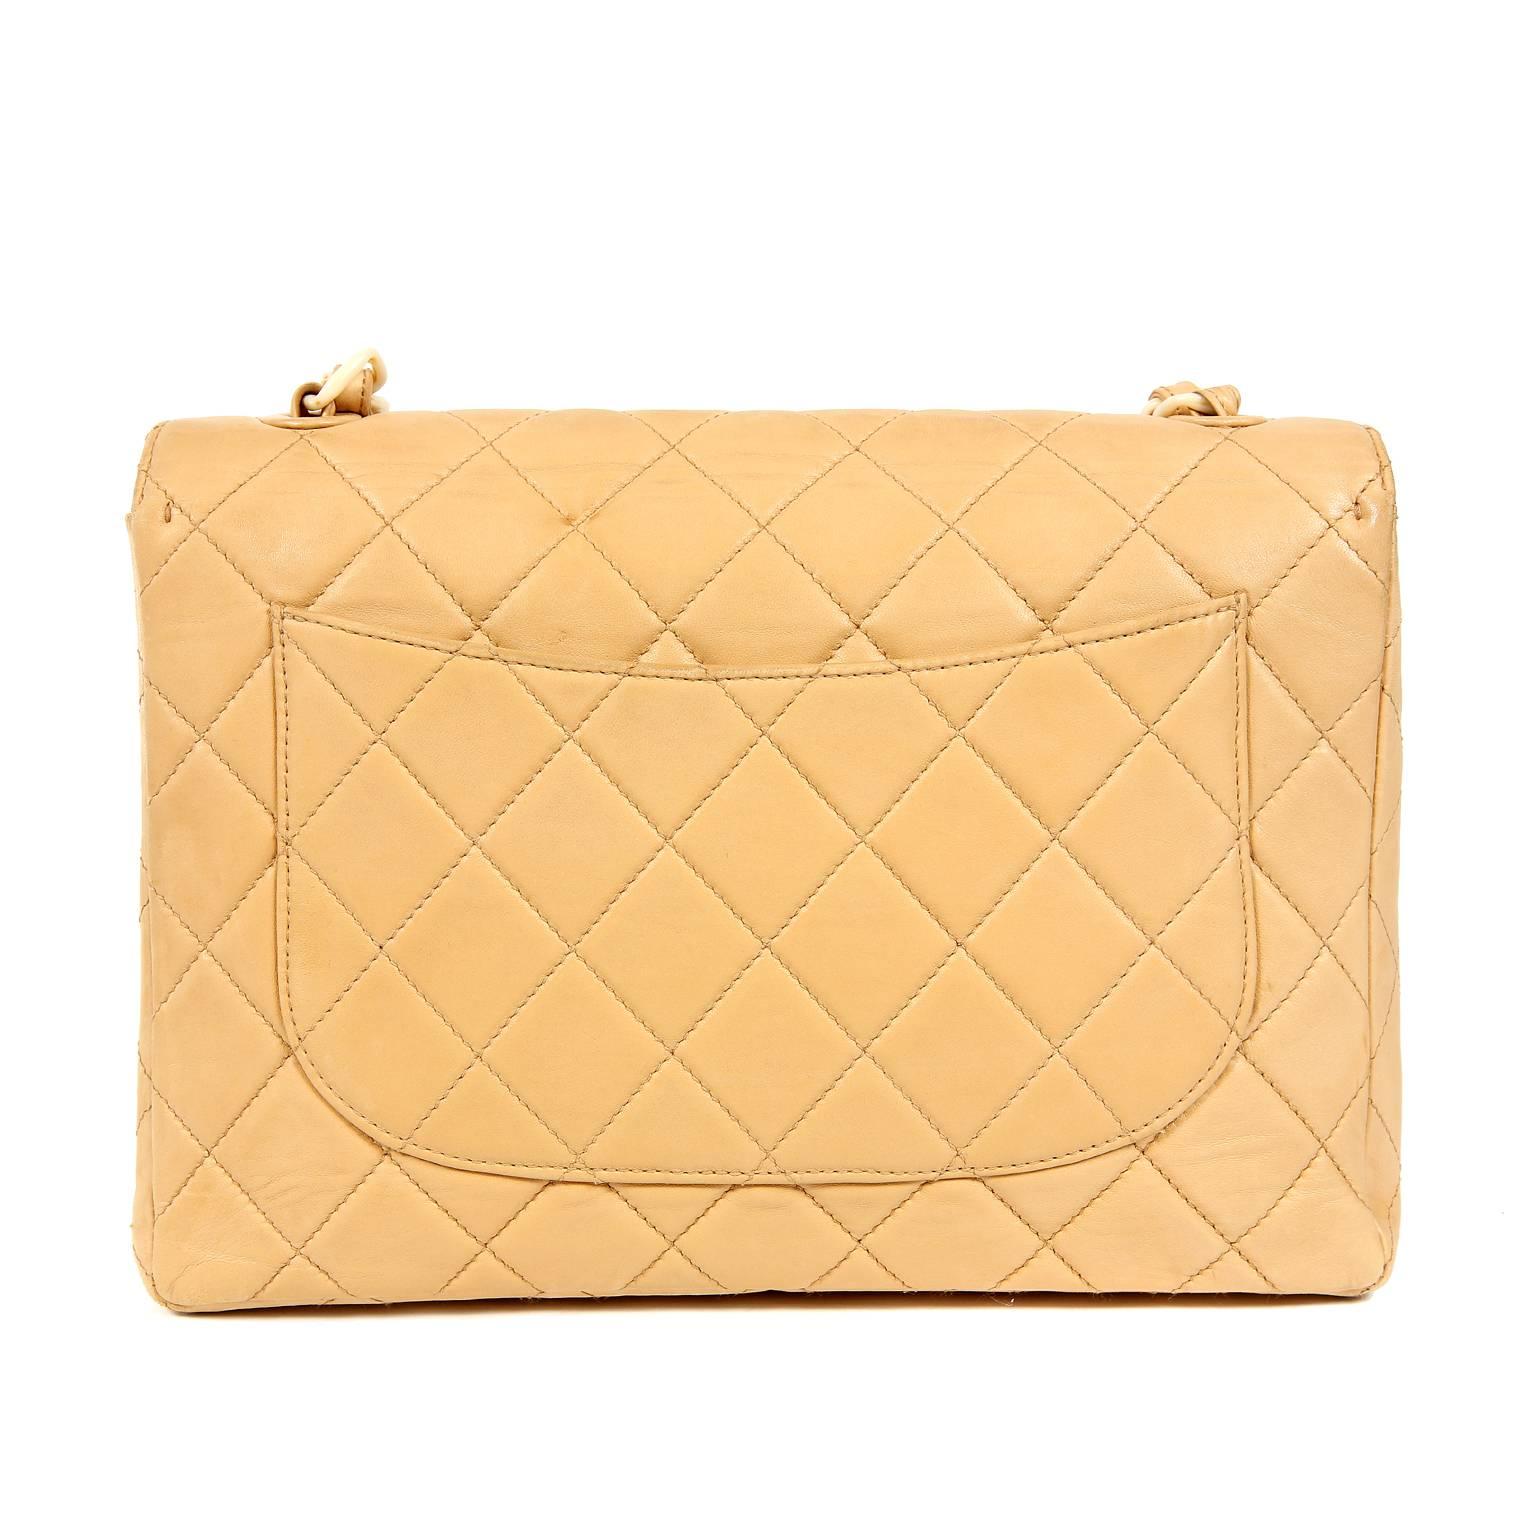 Chanel Beige Lambskin and Bakelite Vintage Classic Flap- Excellent Plus Condition
Rare and collectible, this Vintage Classic Flap is in truly beautiful condition.  Neutral beige lambskin is quilted in signature Chanel diamond pattern.  Cream